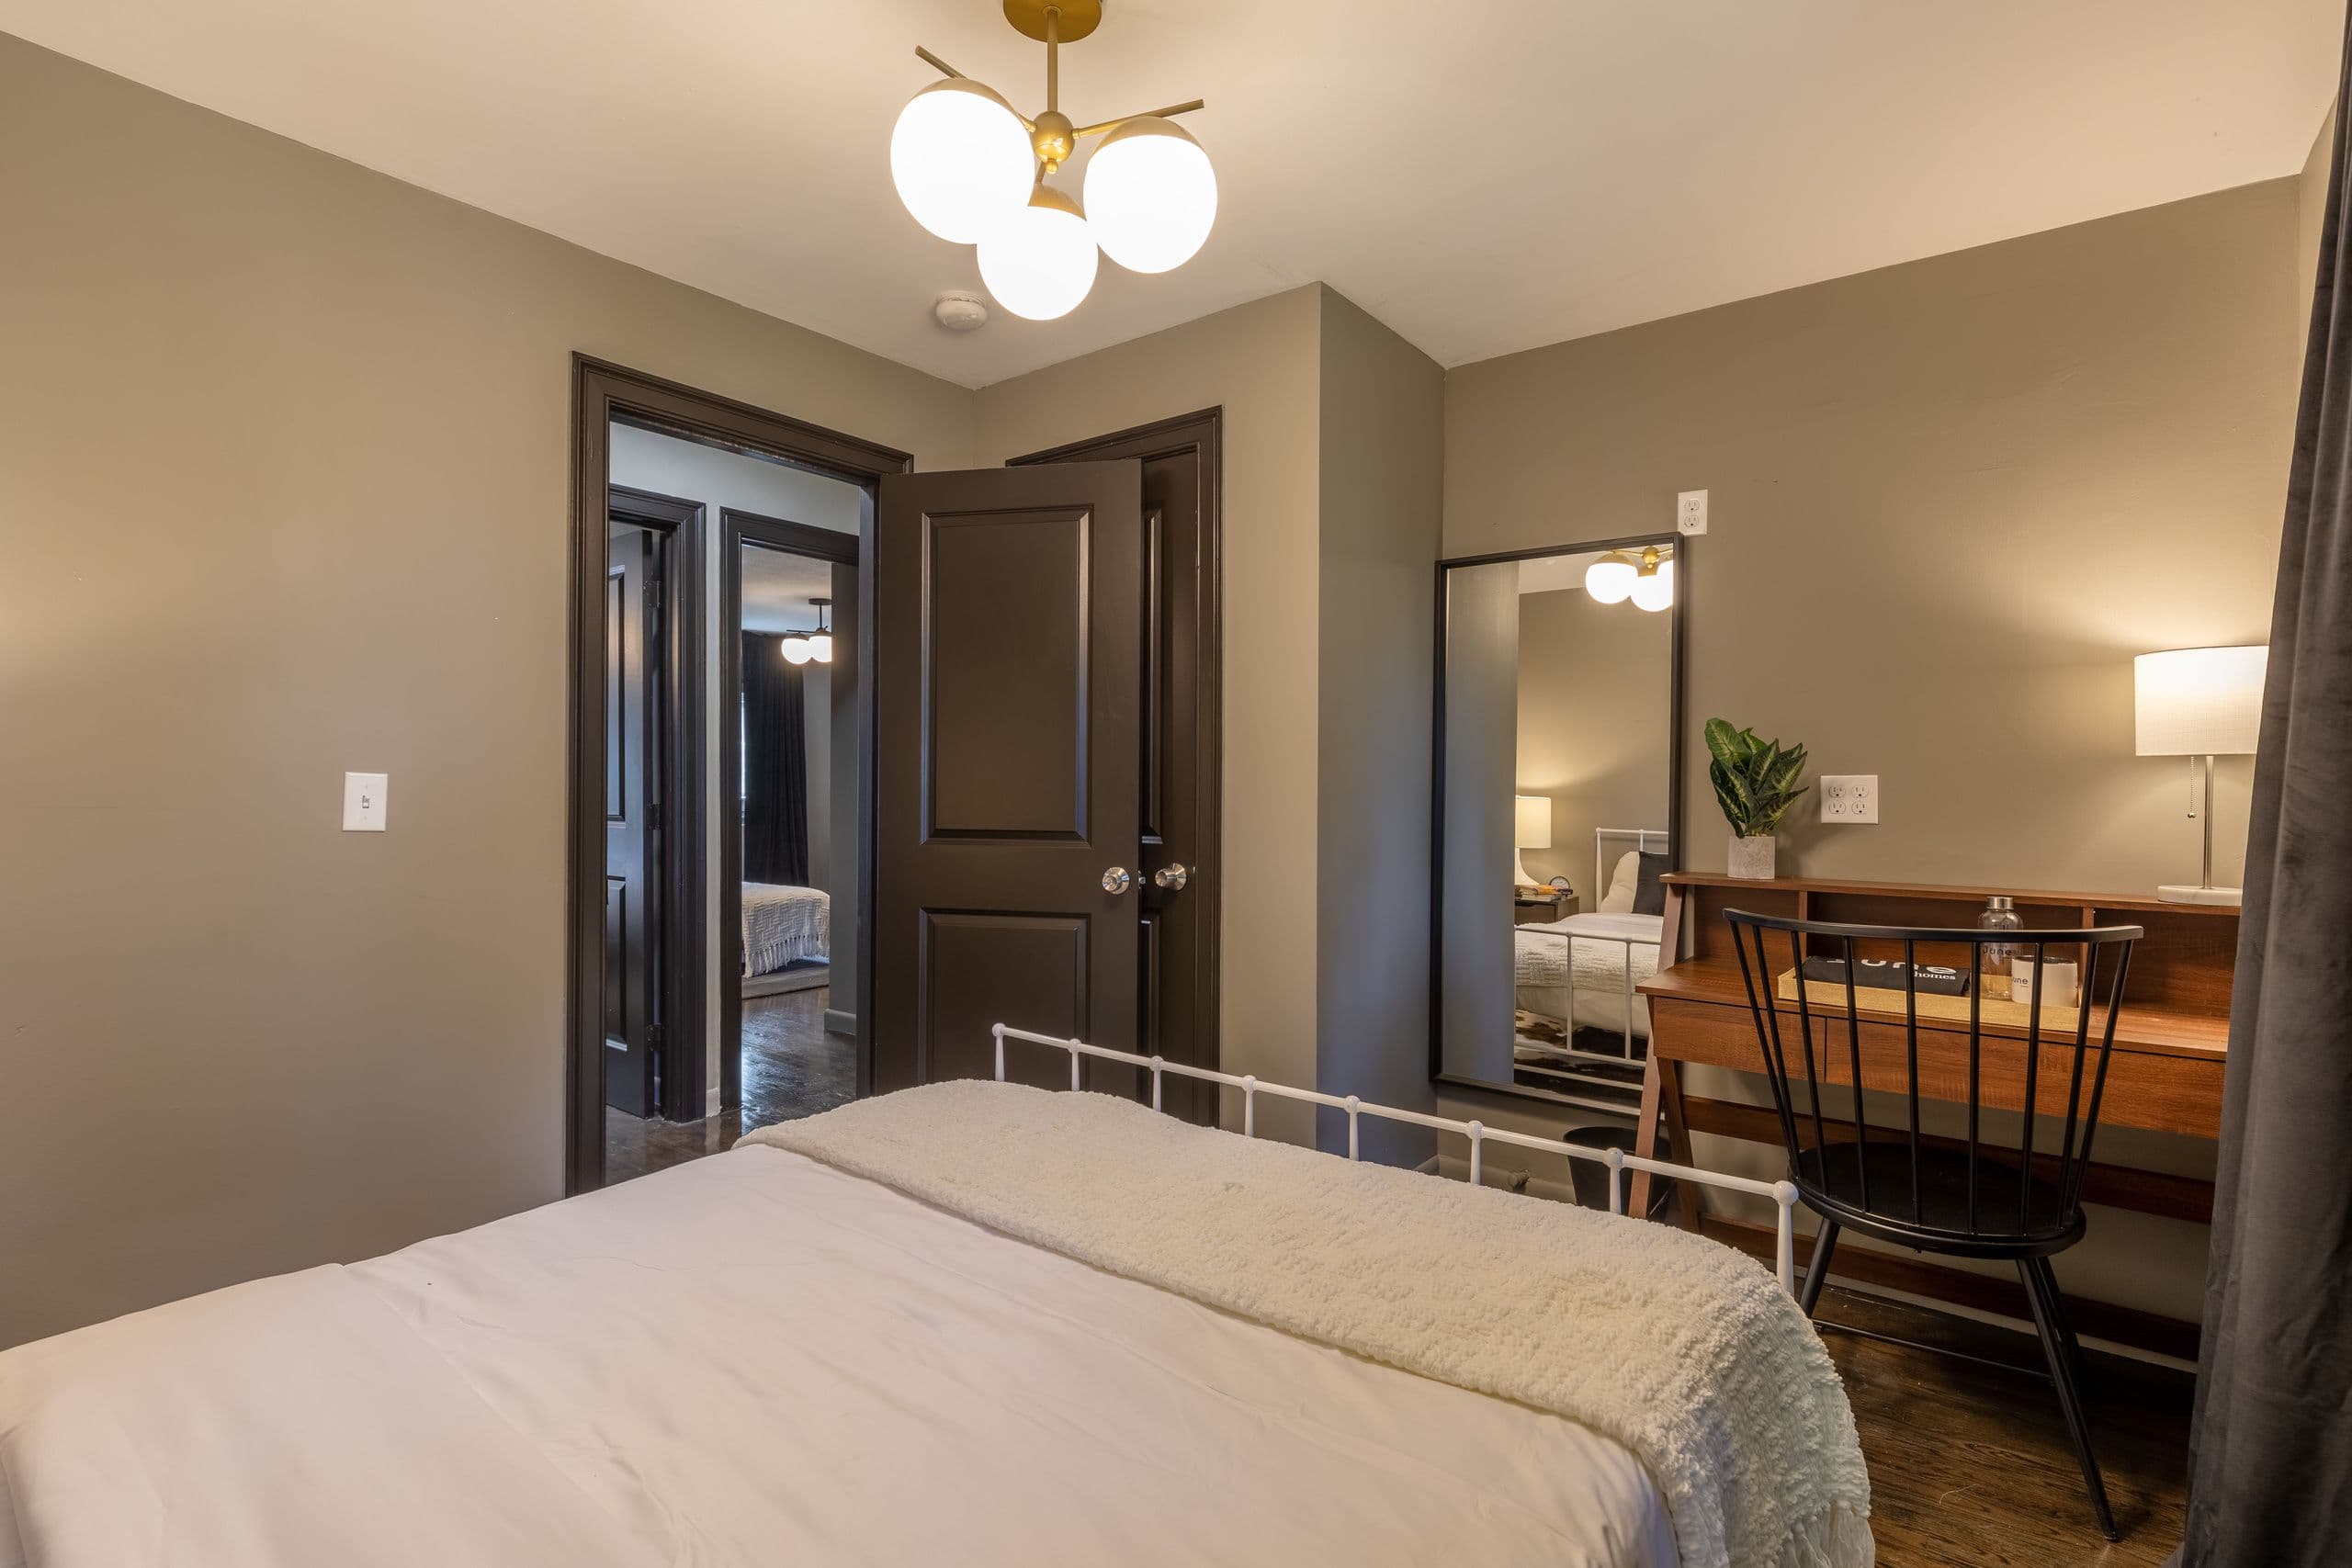 Photo 11 of #425: Queen Bedroom E at June Homes